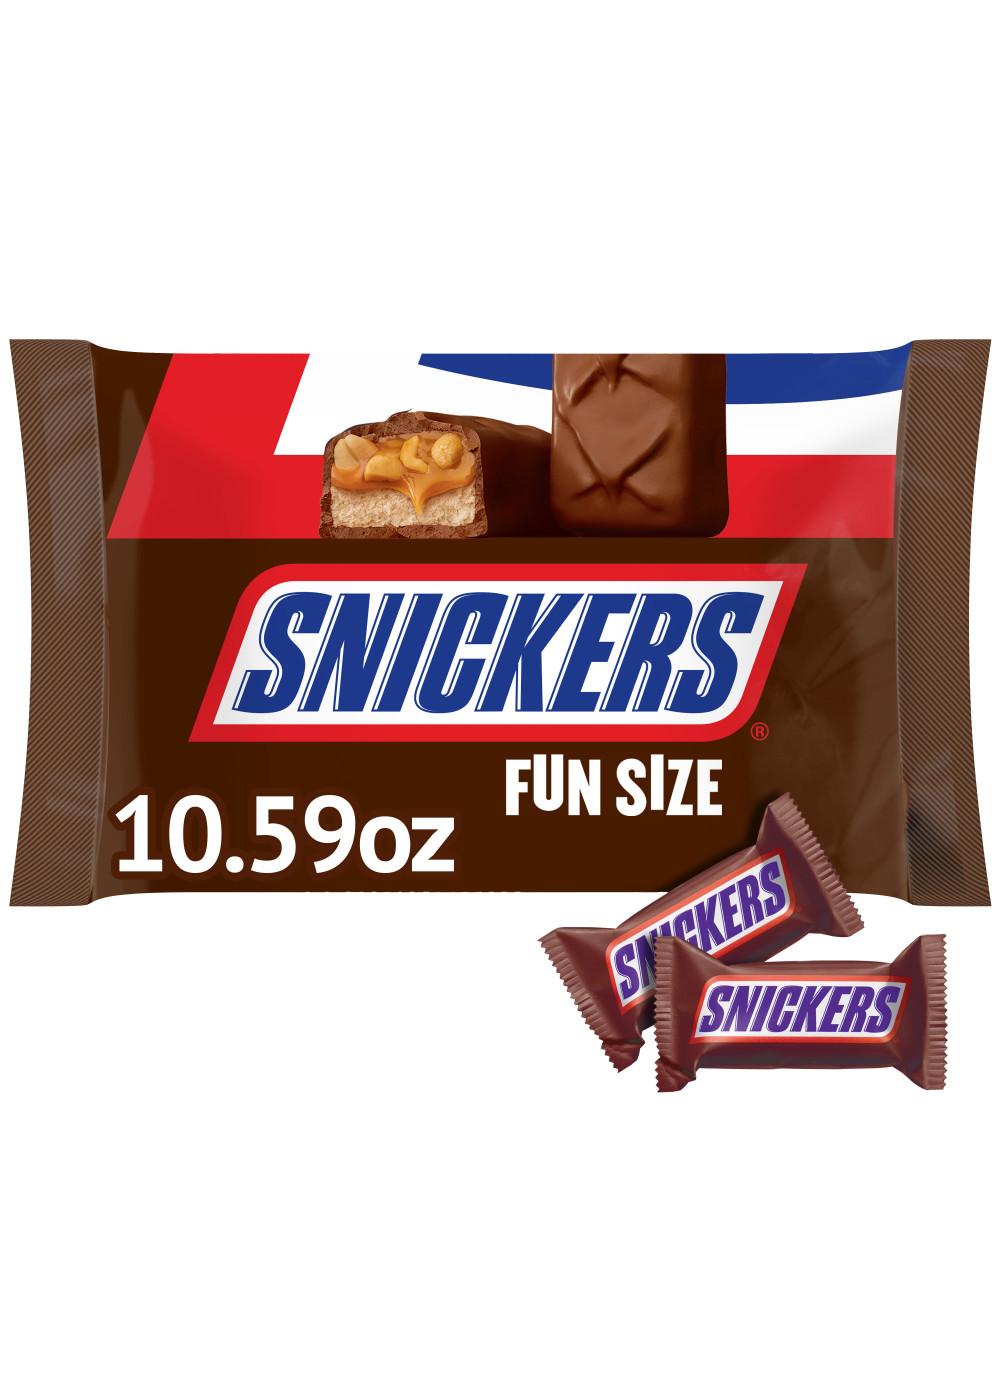 Snickers Chocolate Fun Size Candy Bars; image 3 of 11